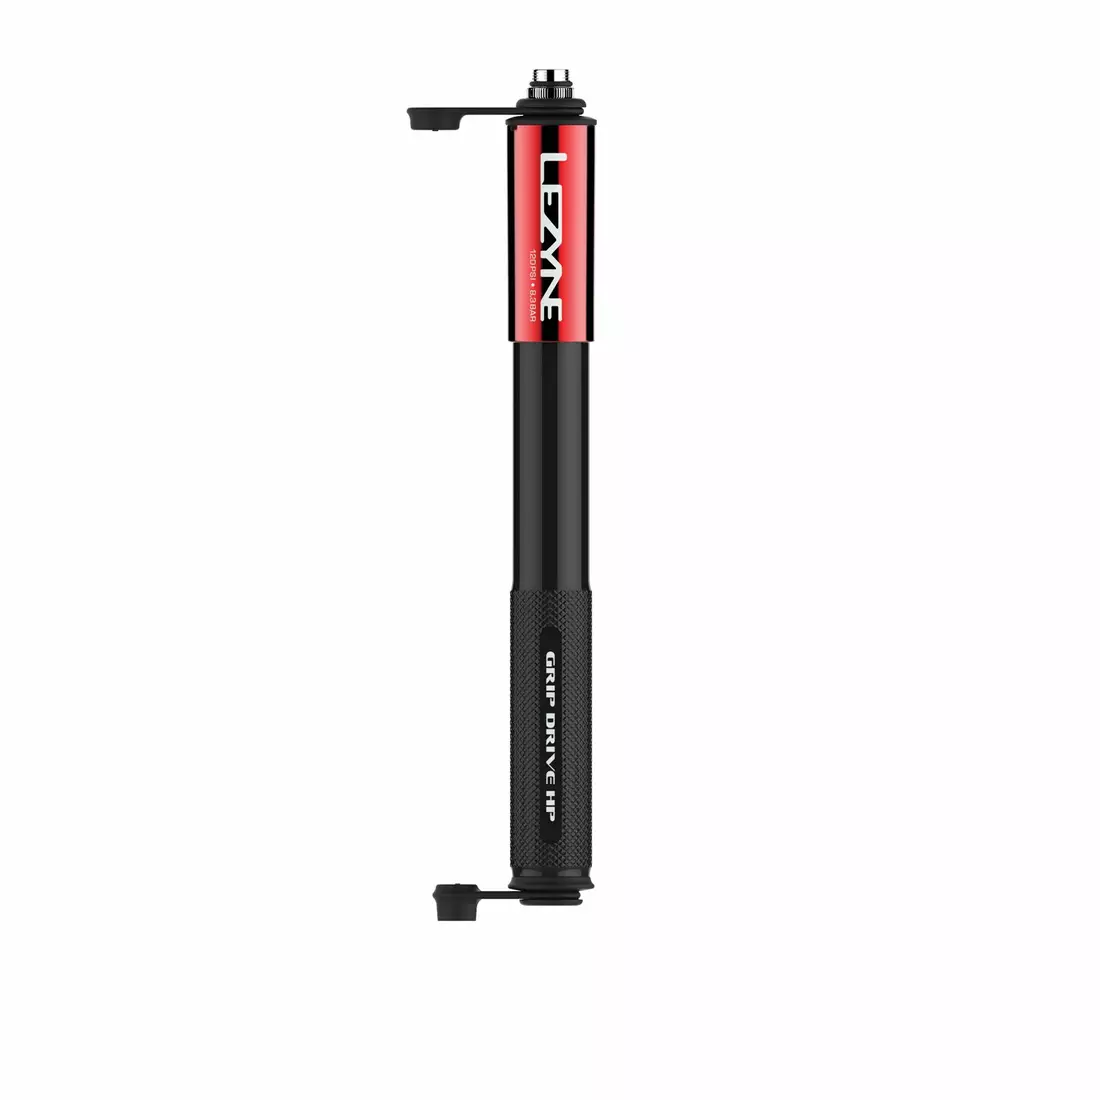 LEZYNE hand bicycle pump GRIP DRIVE HP M ABS 120psi 230mm red LZN-1-MP-GRIPHP-V1M11